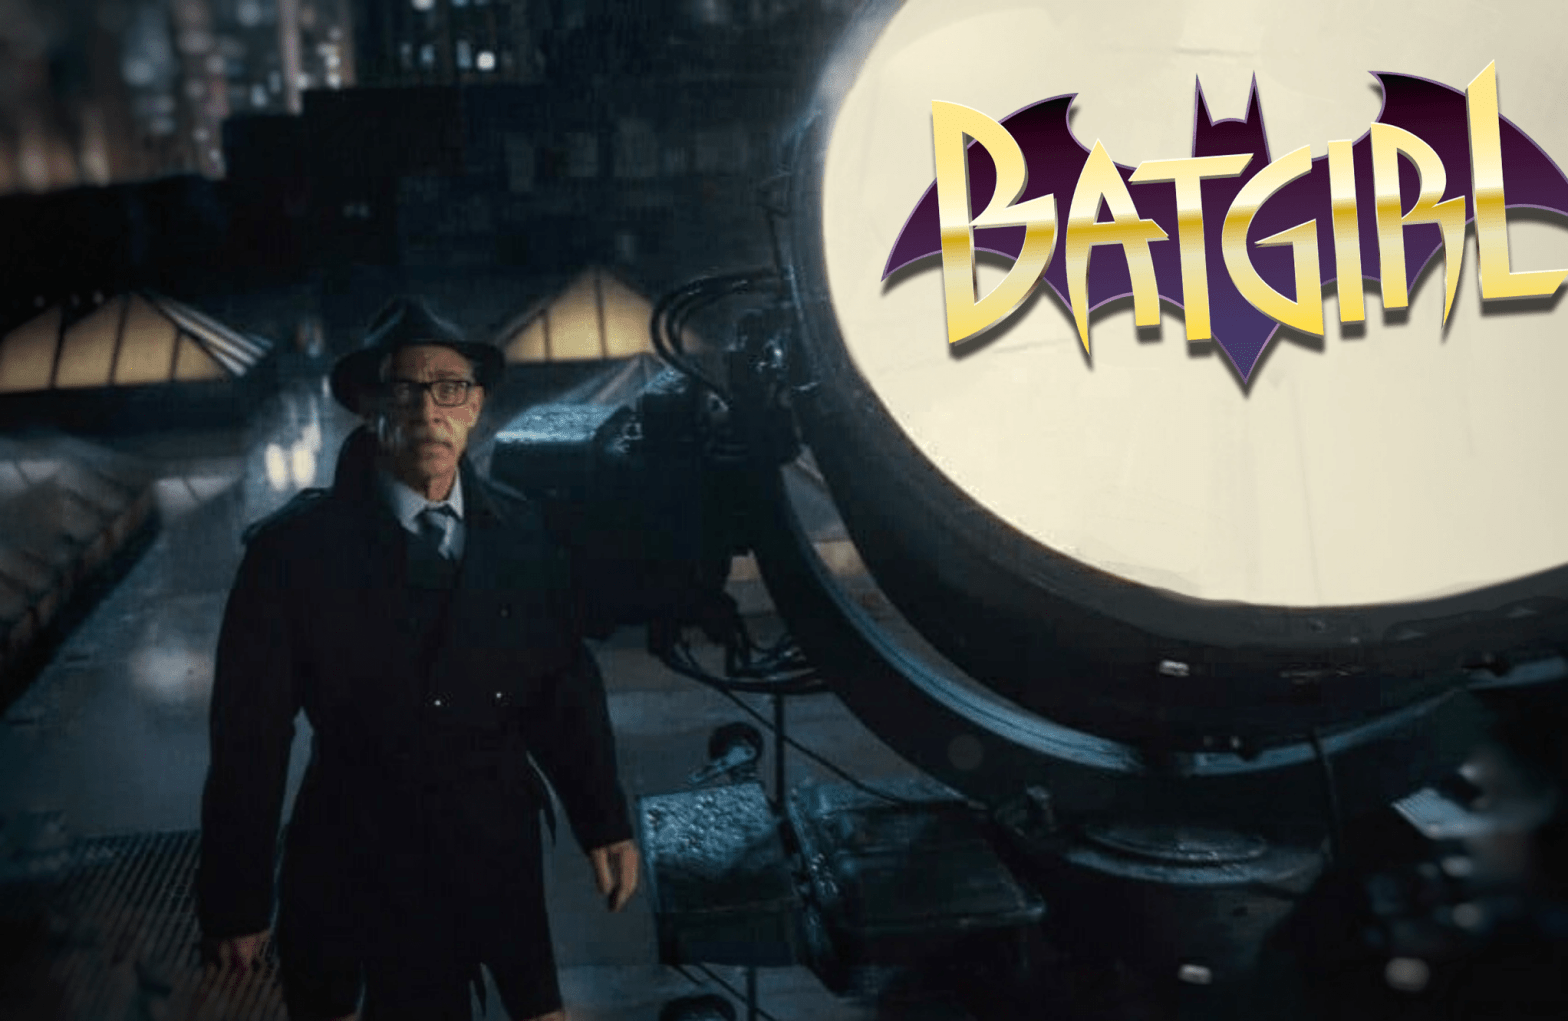 Edited image of J.K. Simmons as Commissioner Gordon standing next to the Bat signal